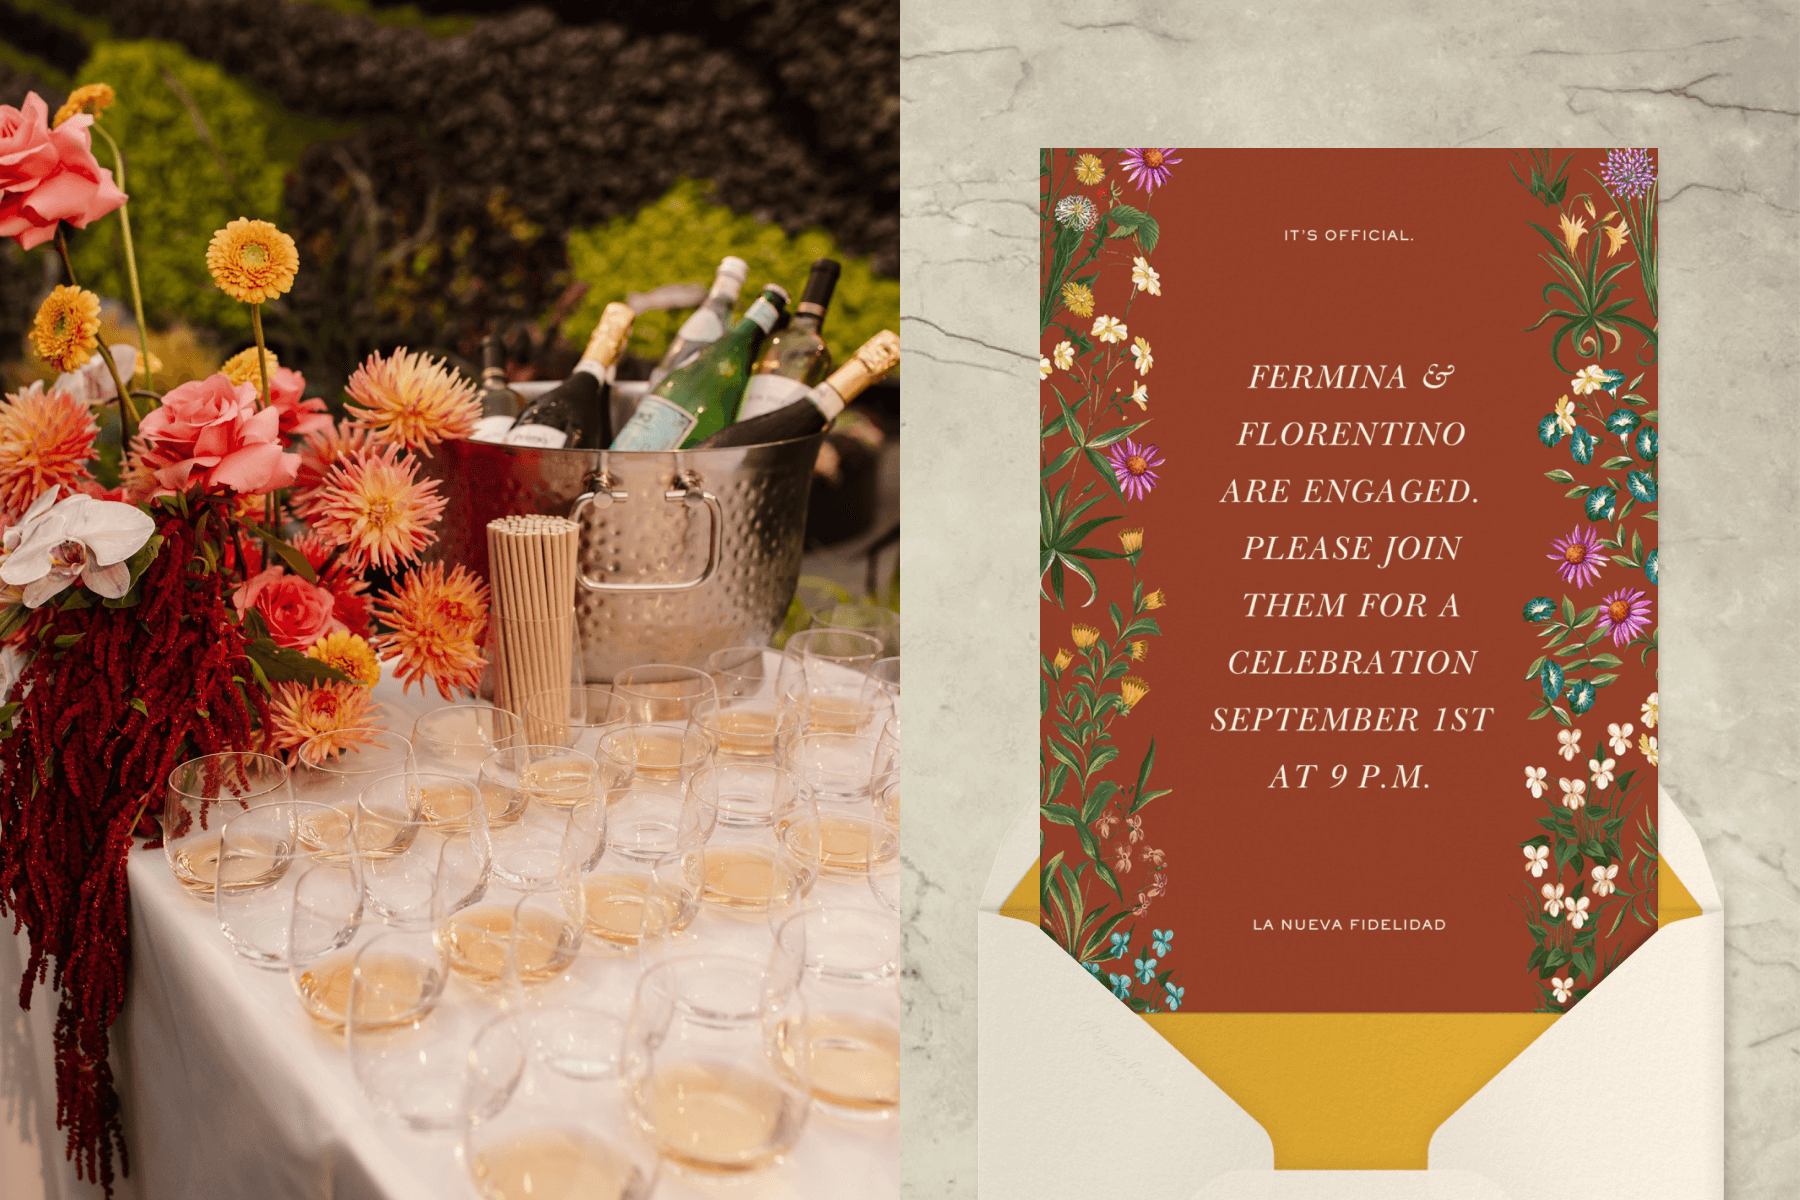 Left: A drinks table at a party with various types of wine poured; right: a brown engagement party invitation featuring a floral motif and paired with a cream and yellow envelope.